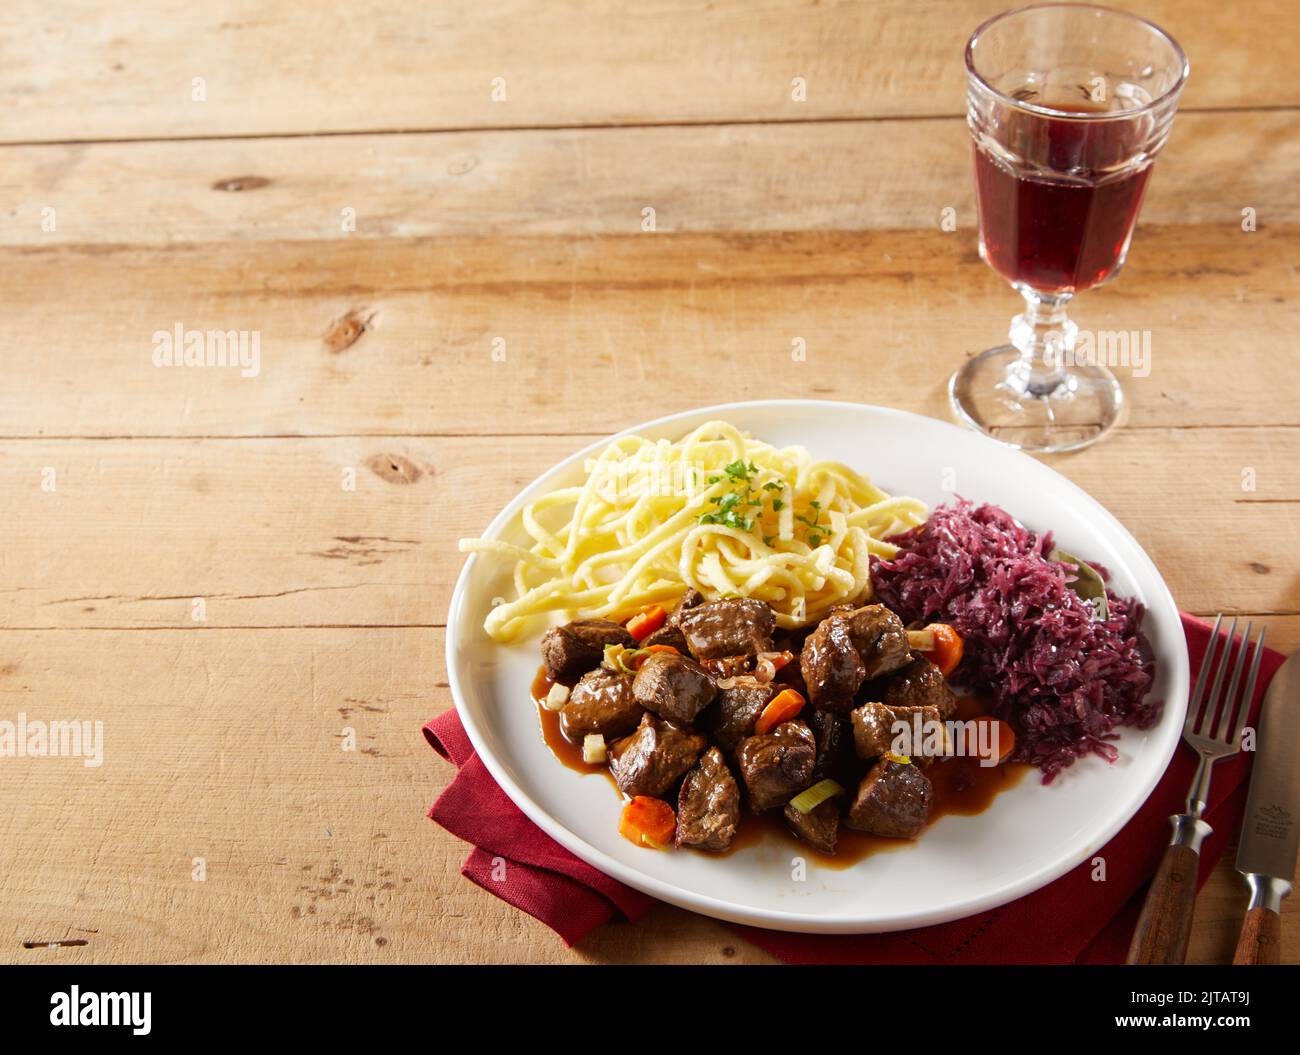 From above tasty beef goulash and spatzle pasta with sauerkraut served for lunch on plate near glass goblet of red wine on timber table in daytime Stock Photo